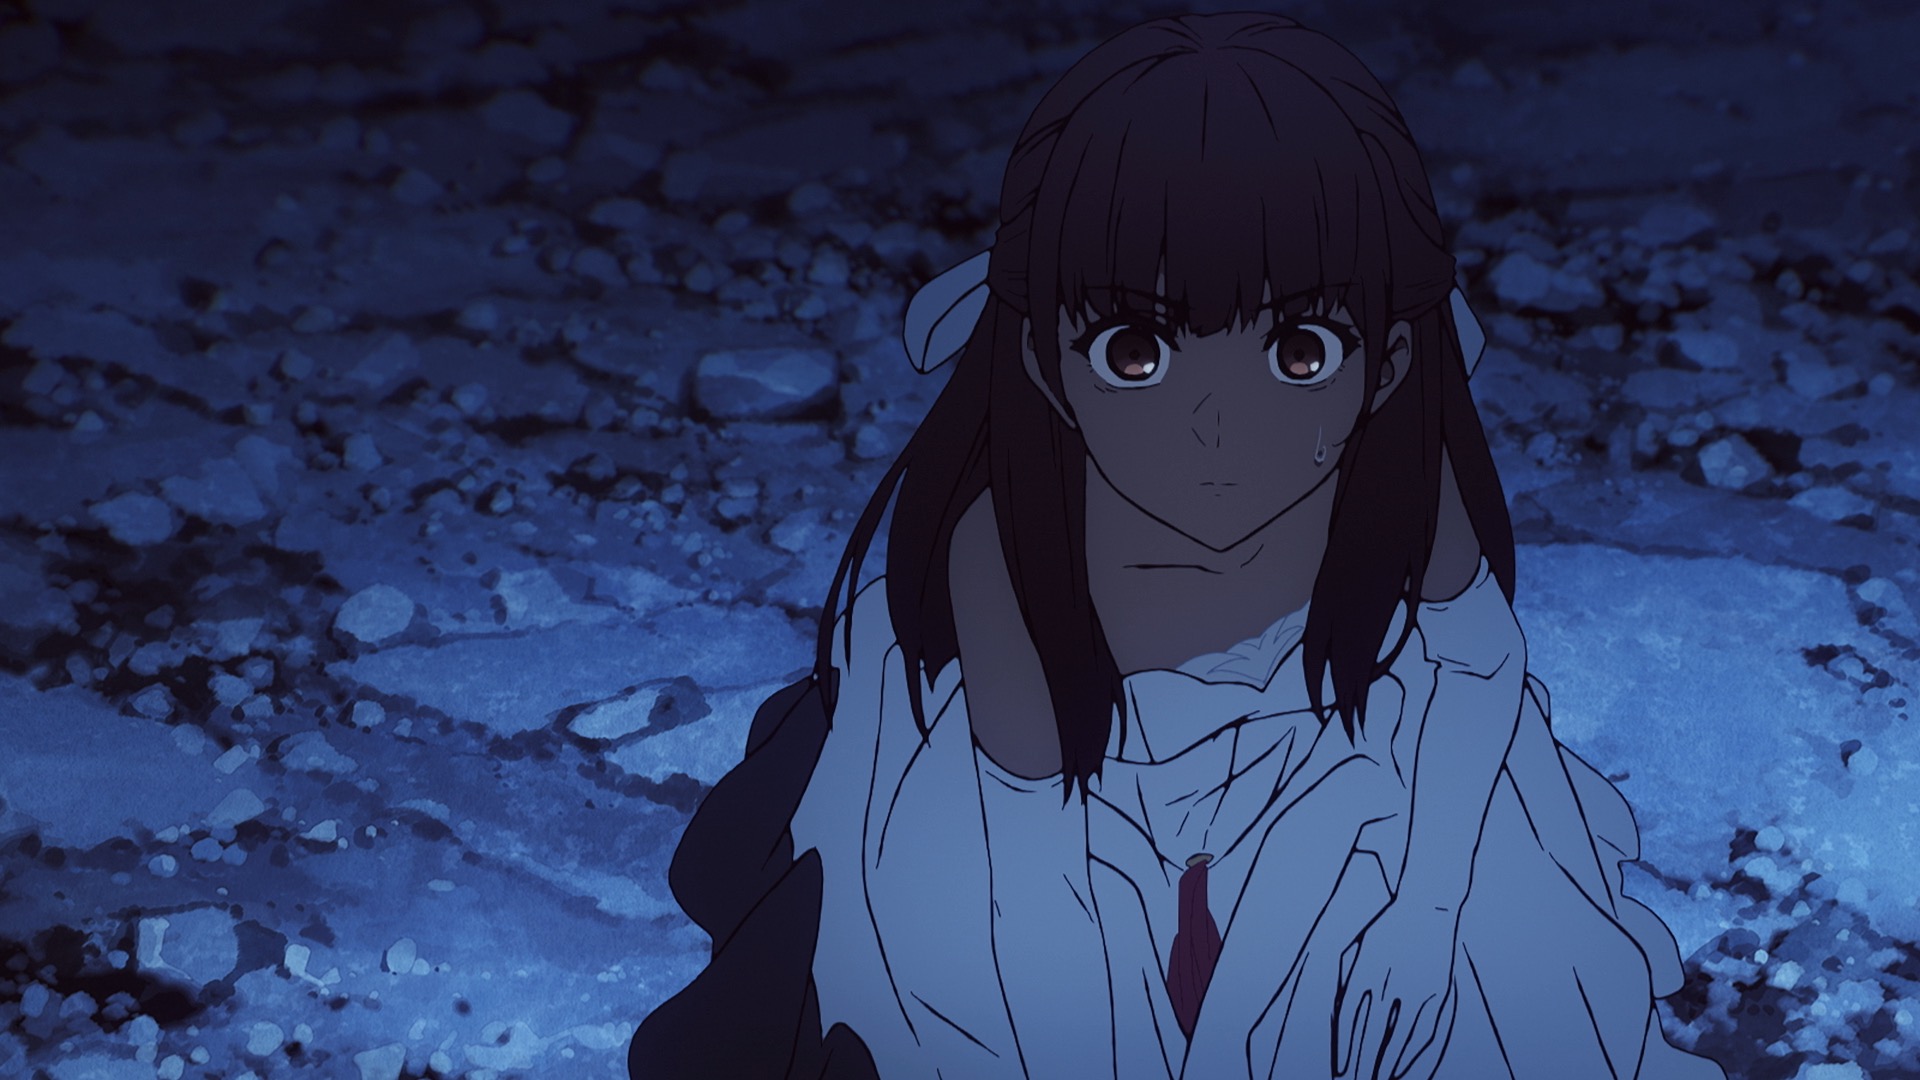 HD desktop wallpaper featuring a character from Fate/strange fake anime, with a dark blue nighttime background and rocky terrain.